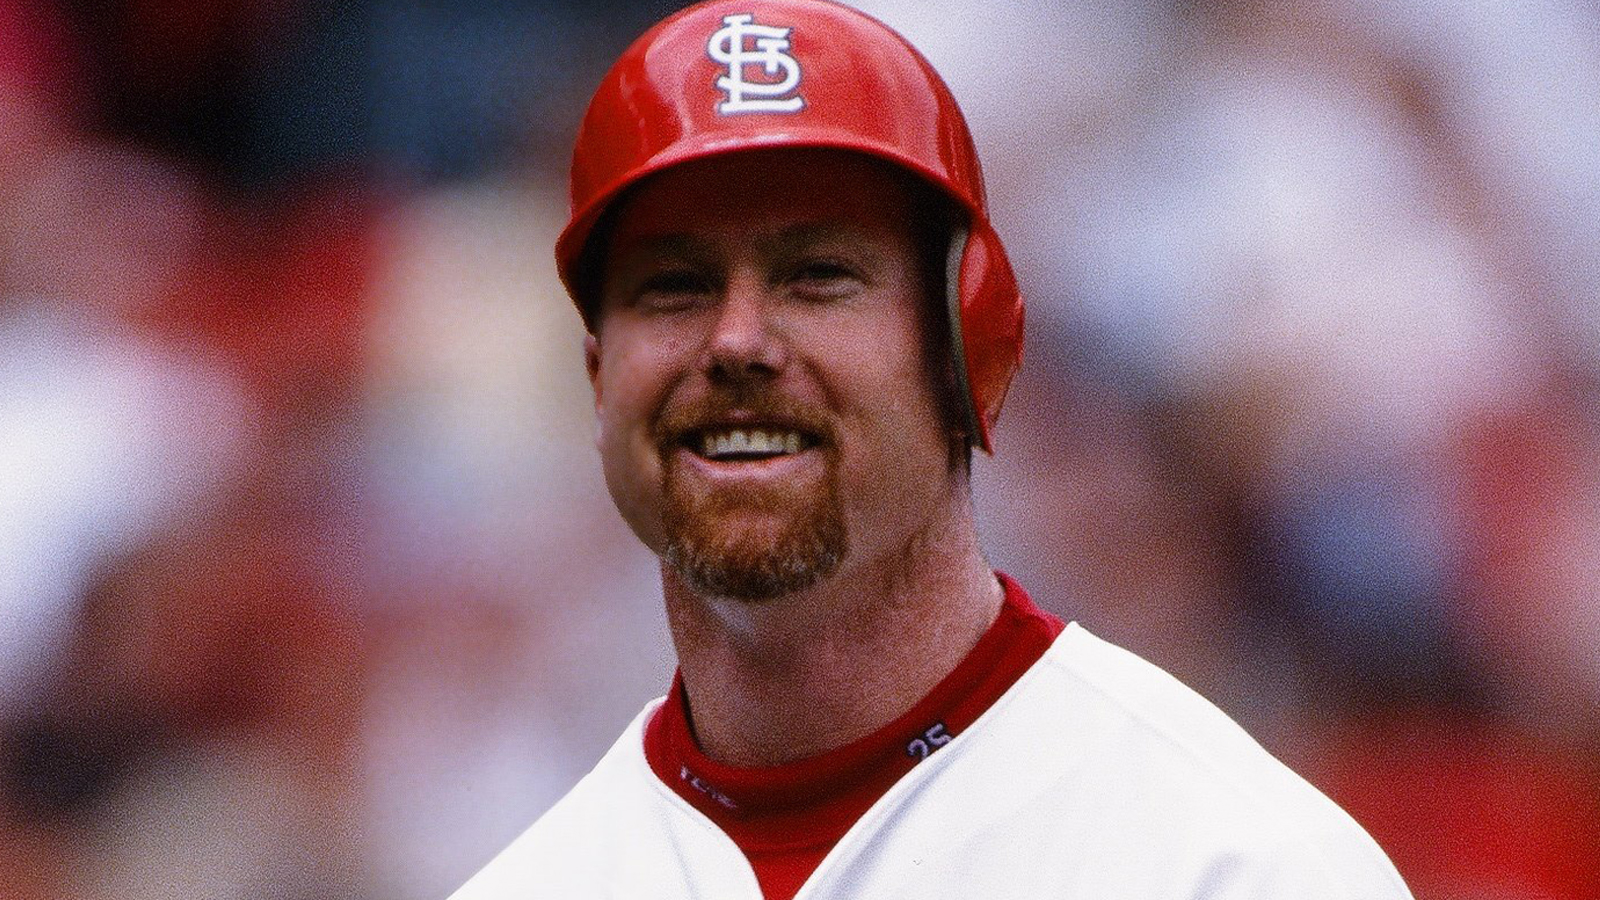 Mark McGwire 'absolutely' believes he would have hit 70 home runs